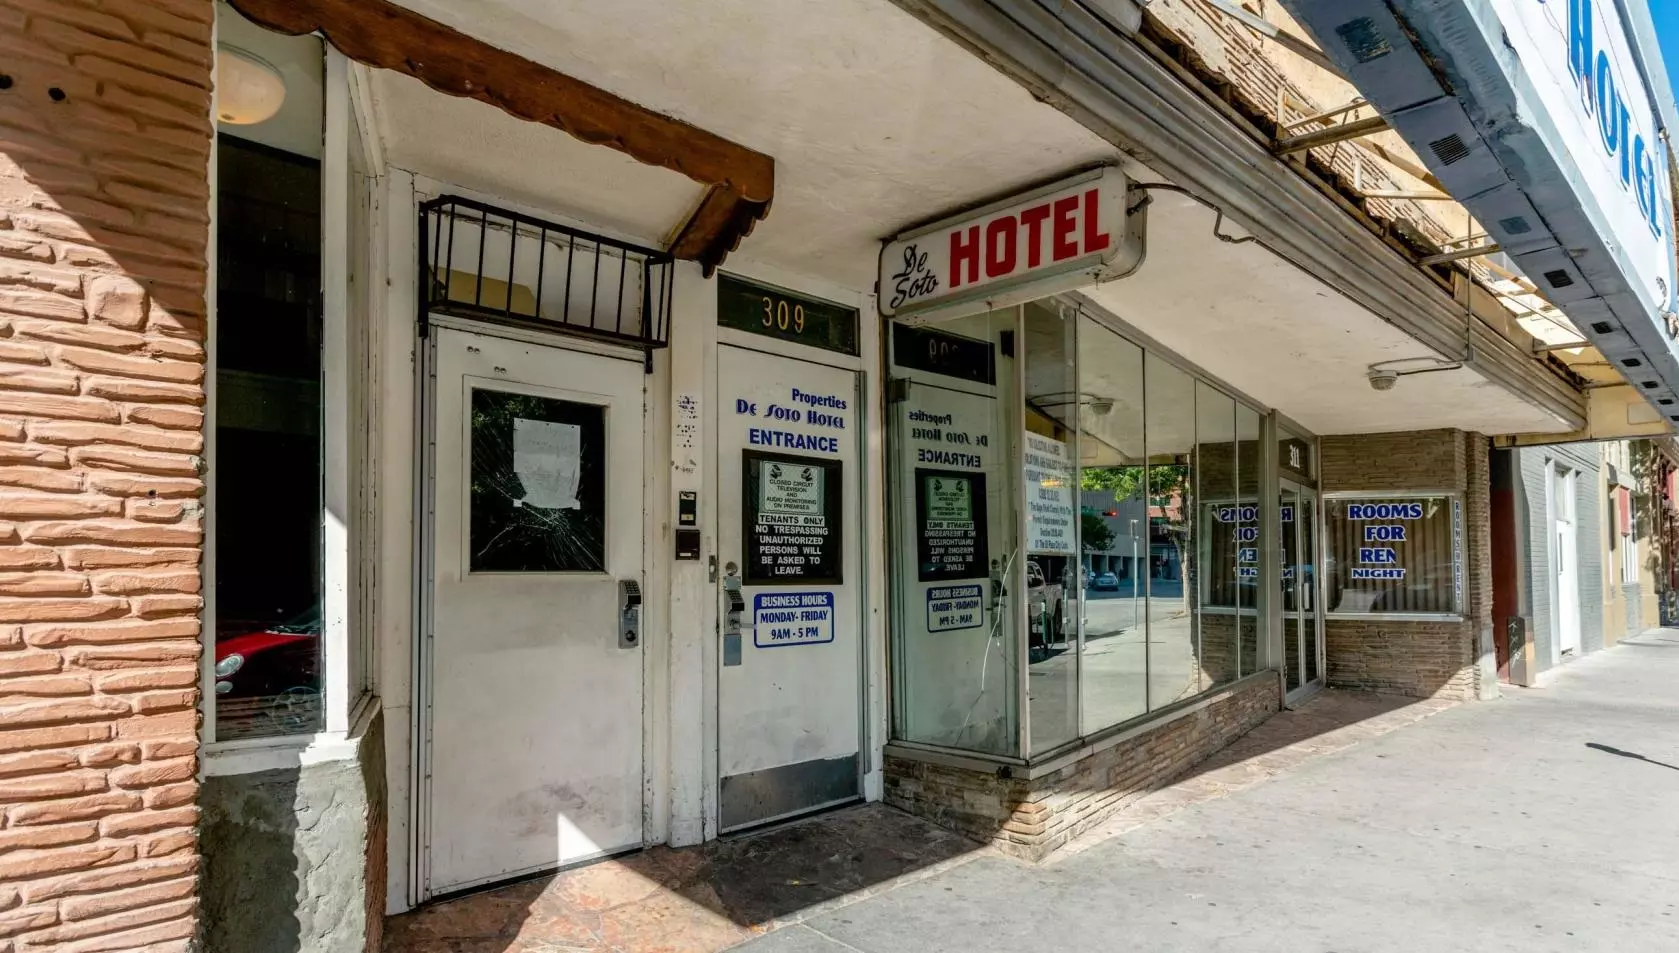 For Sale: Super-Haunted Downtown El Paso Hotel (Ghosts Included)